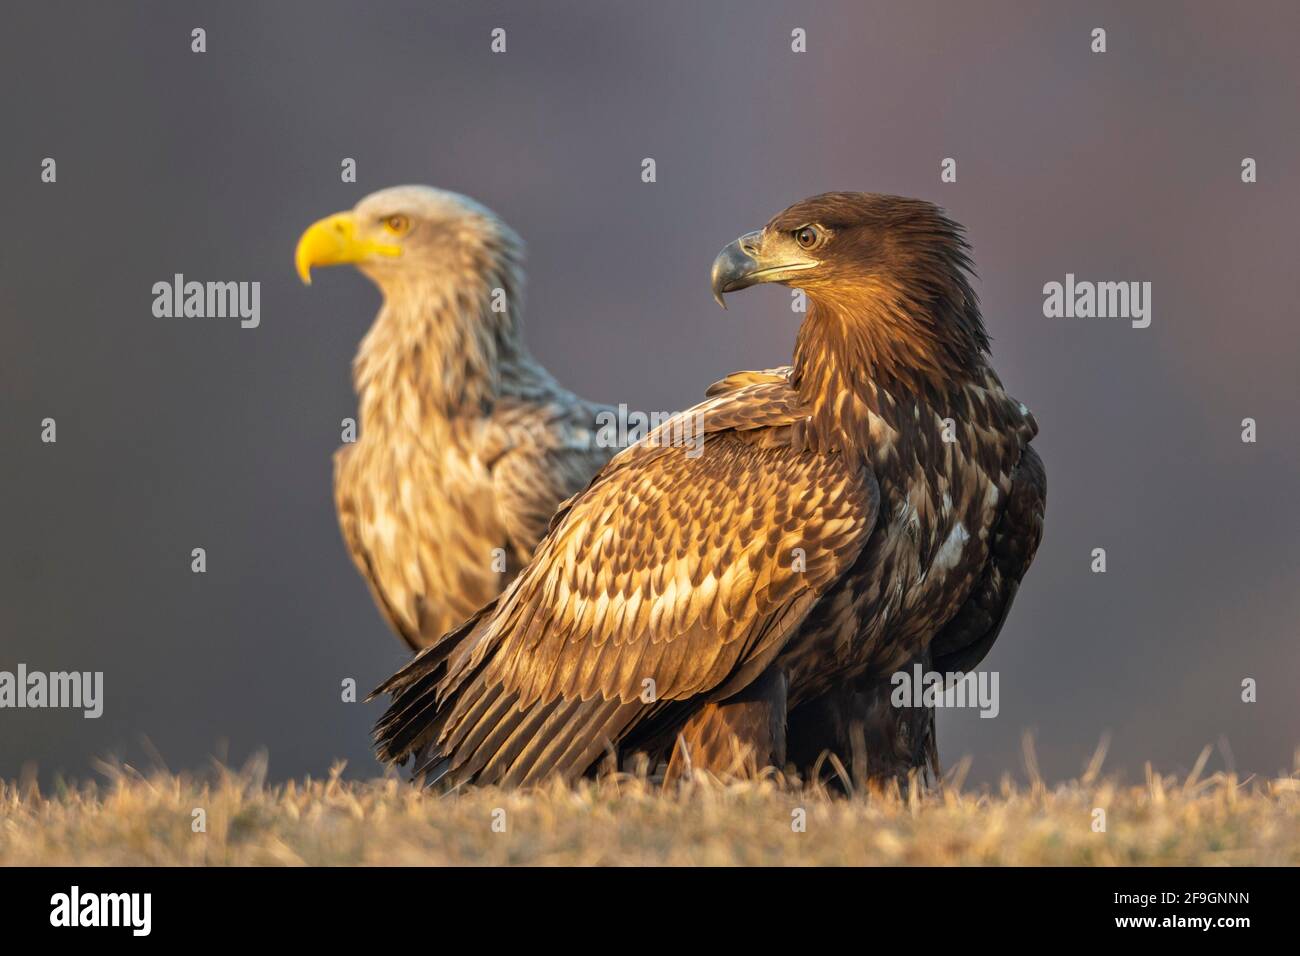 Young white-tailed eagle (Haliaeetus albicilla) in foreground with old eagle in background, Kutno, Poland Stock Photo